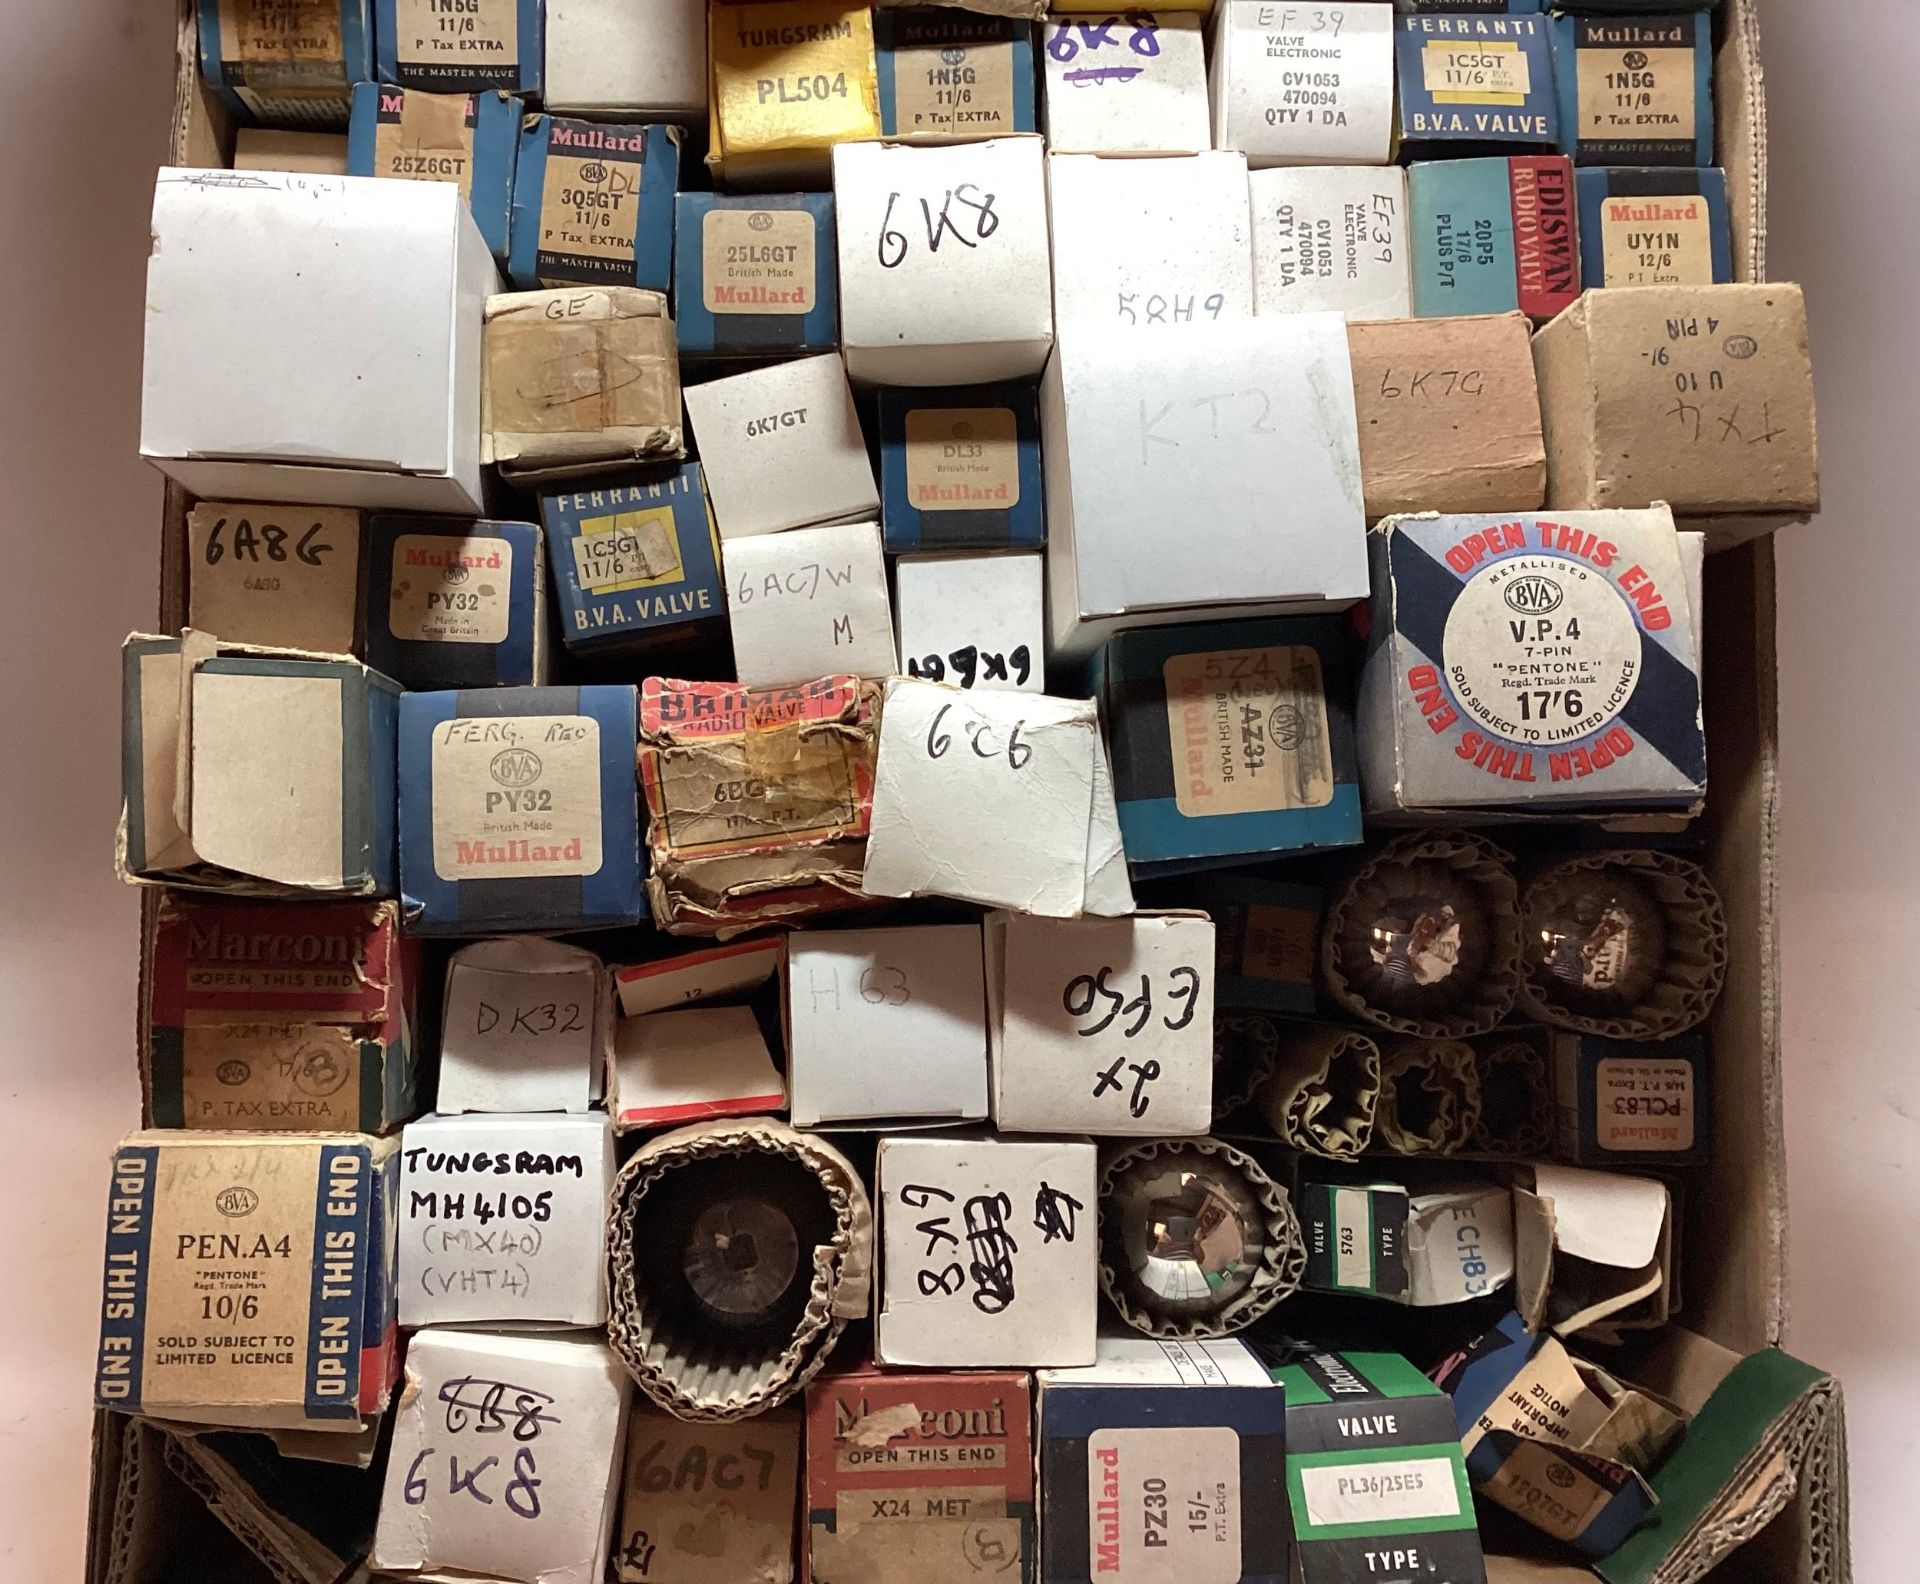 LARGE COLLECTION OF VARIOUS VINTAGE VALVES. Here we find a mixture of old and new stock valves - Image 3 of 4